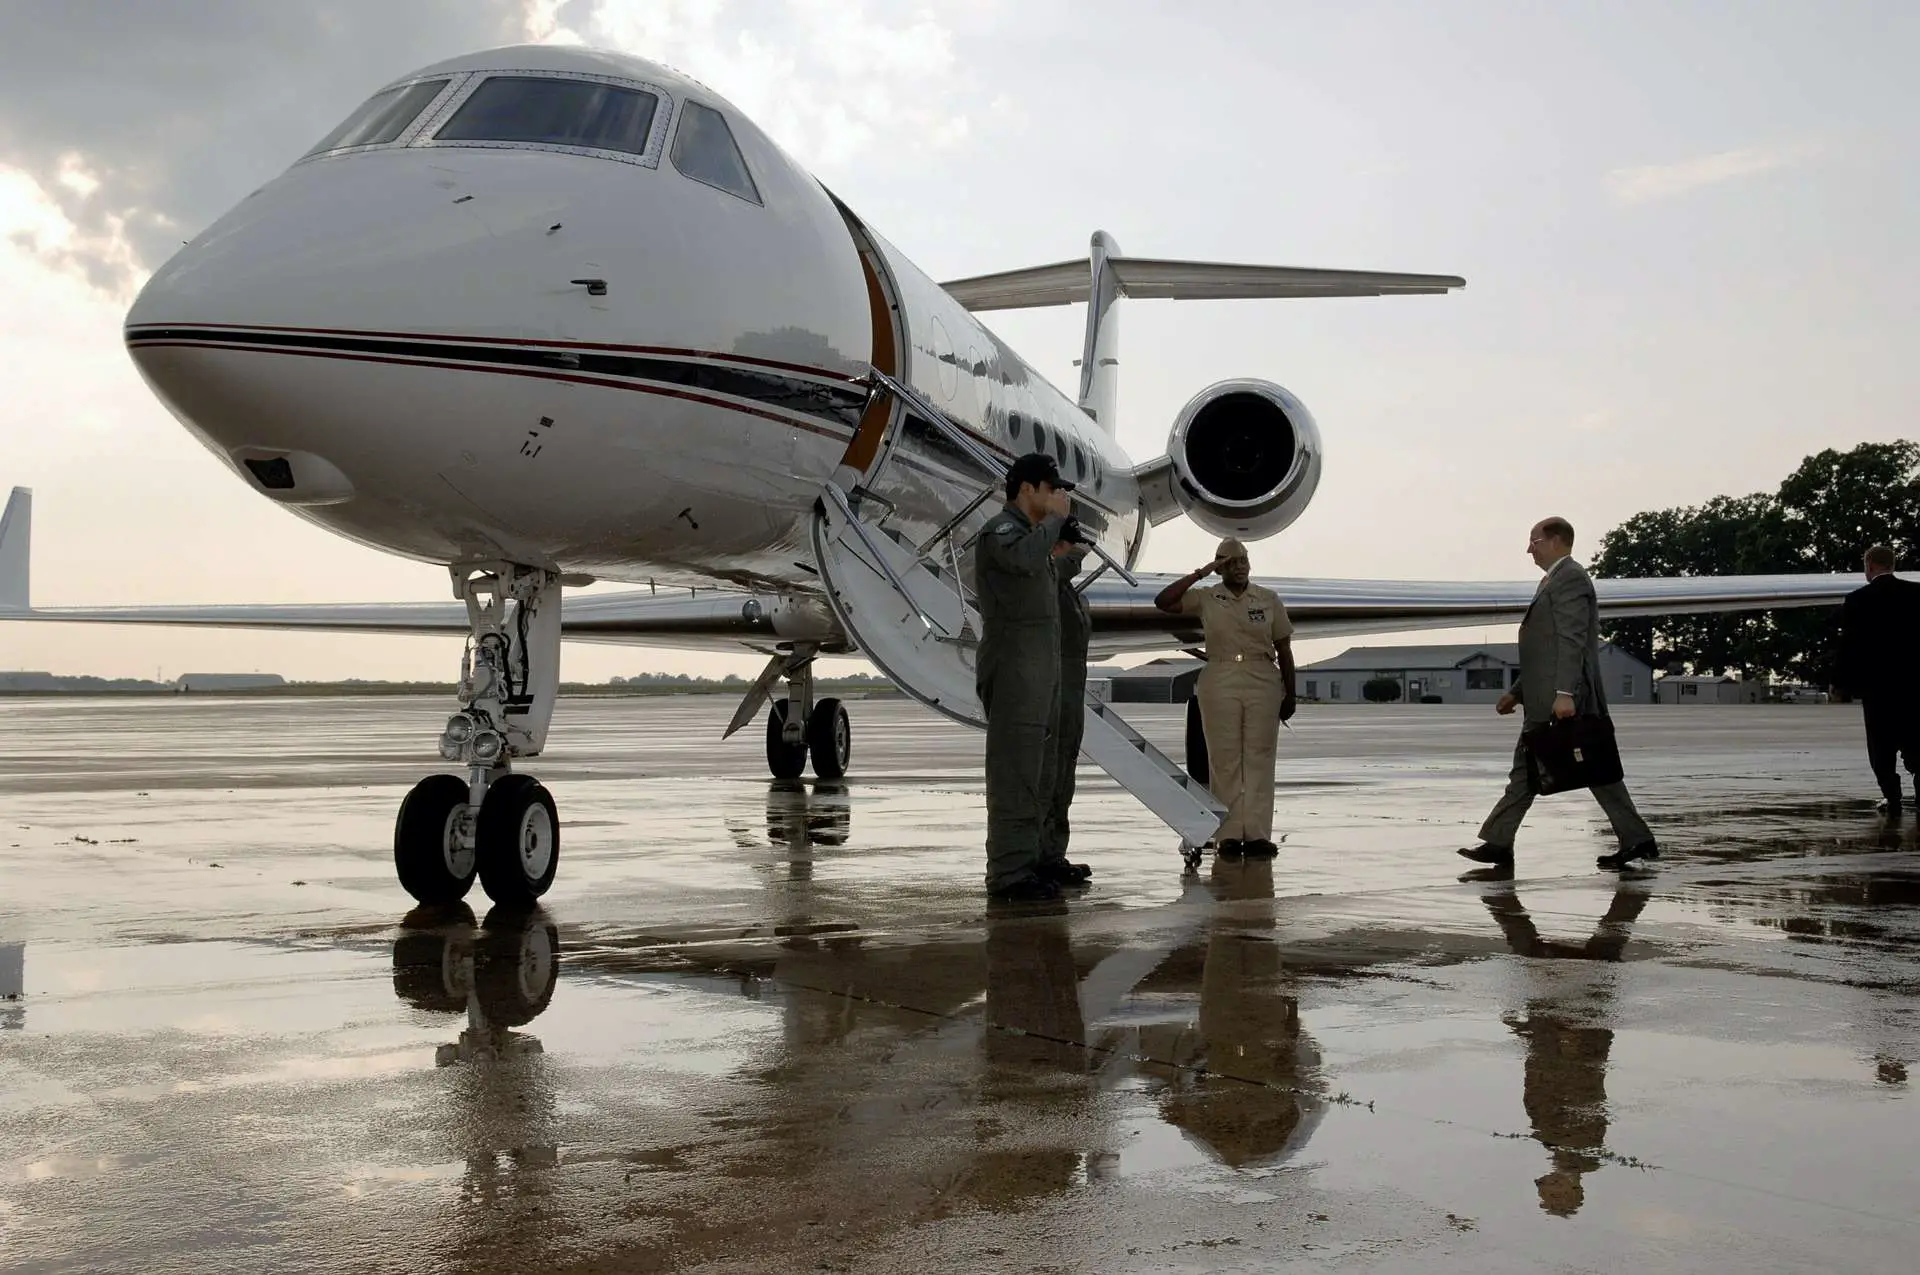 Business Aircraft | Travel Jobs | Business Terminology - The Top 10 Workplace Wank Words That Make Us Want To Travel | Travel Jobs | Author: Anthony Bianco - The Travel Tart Blog